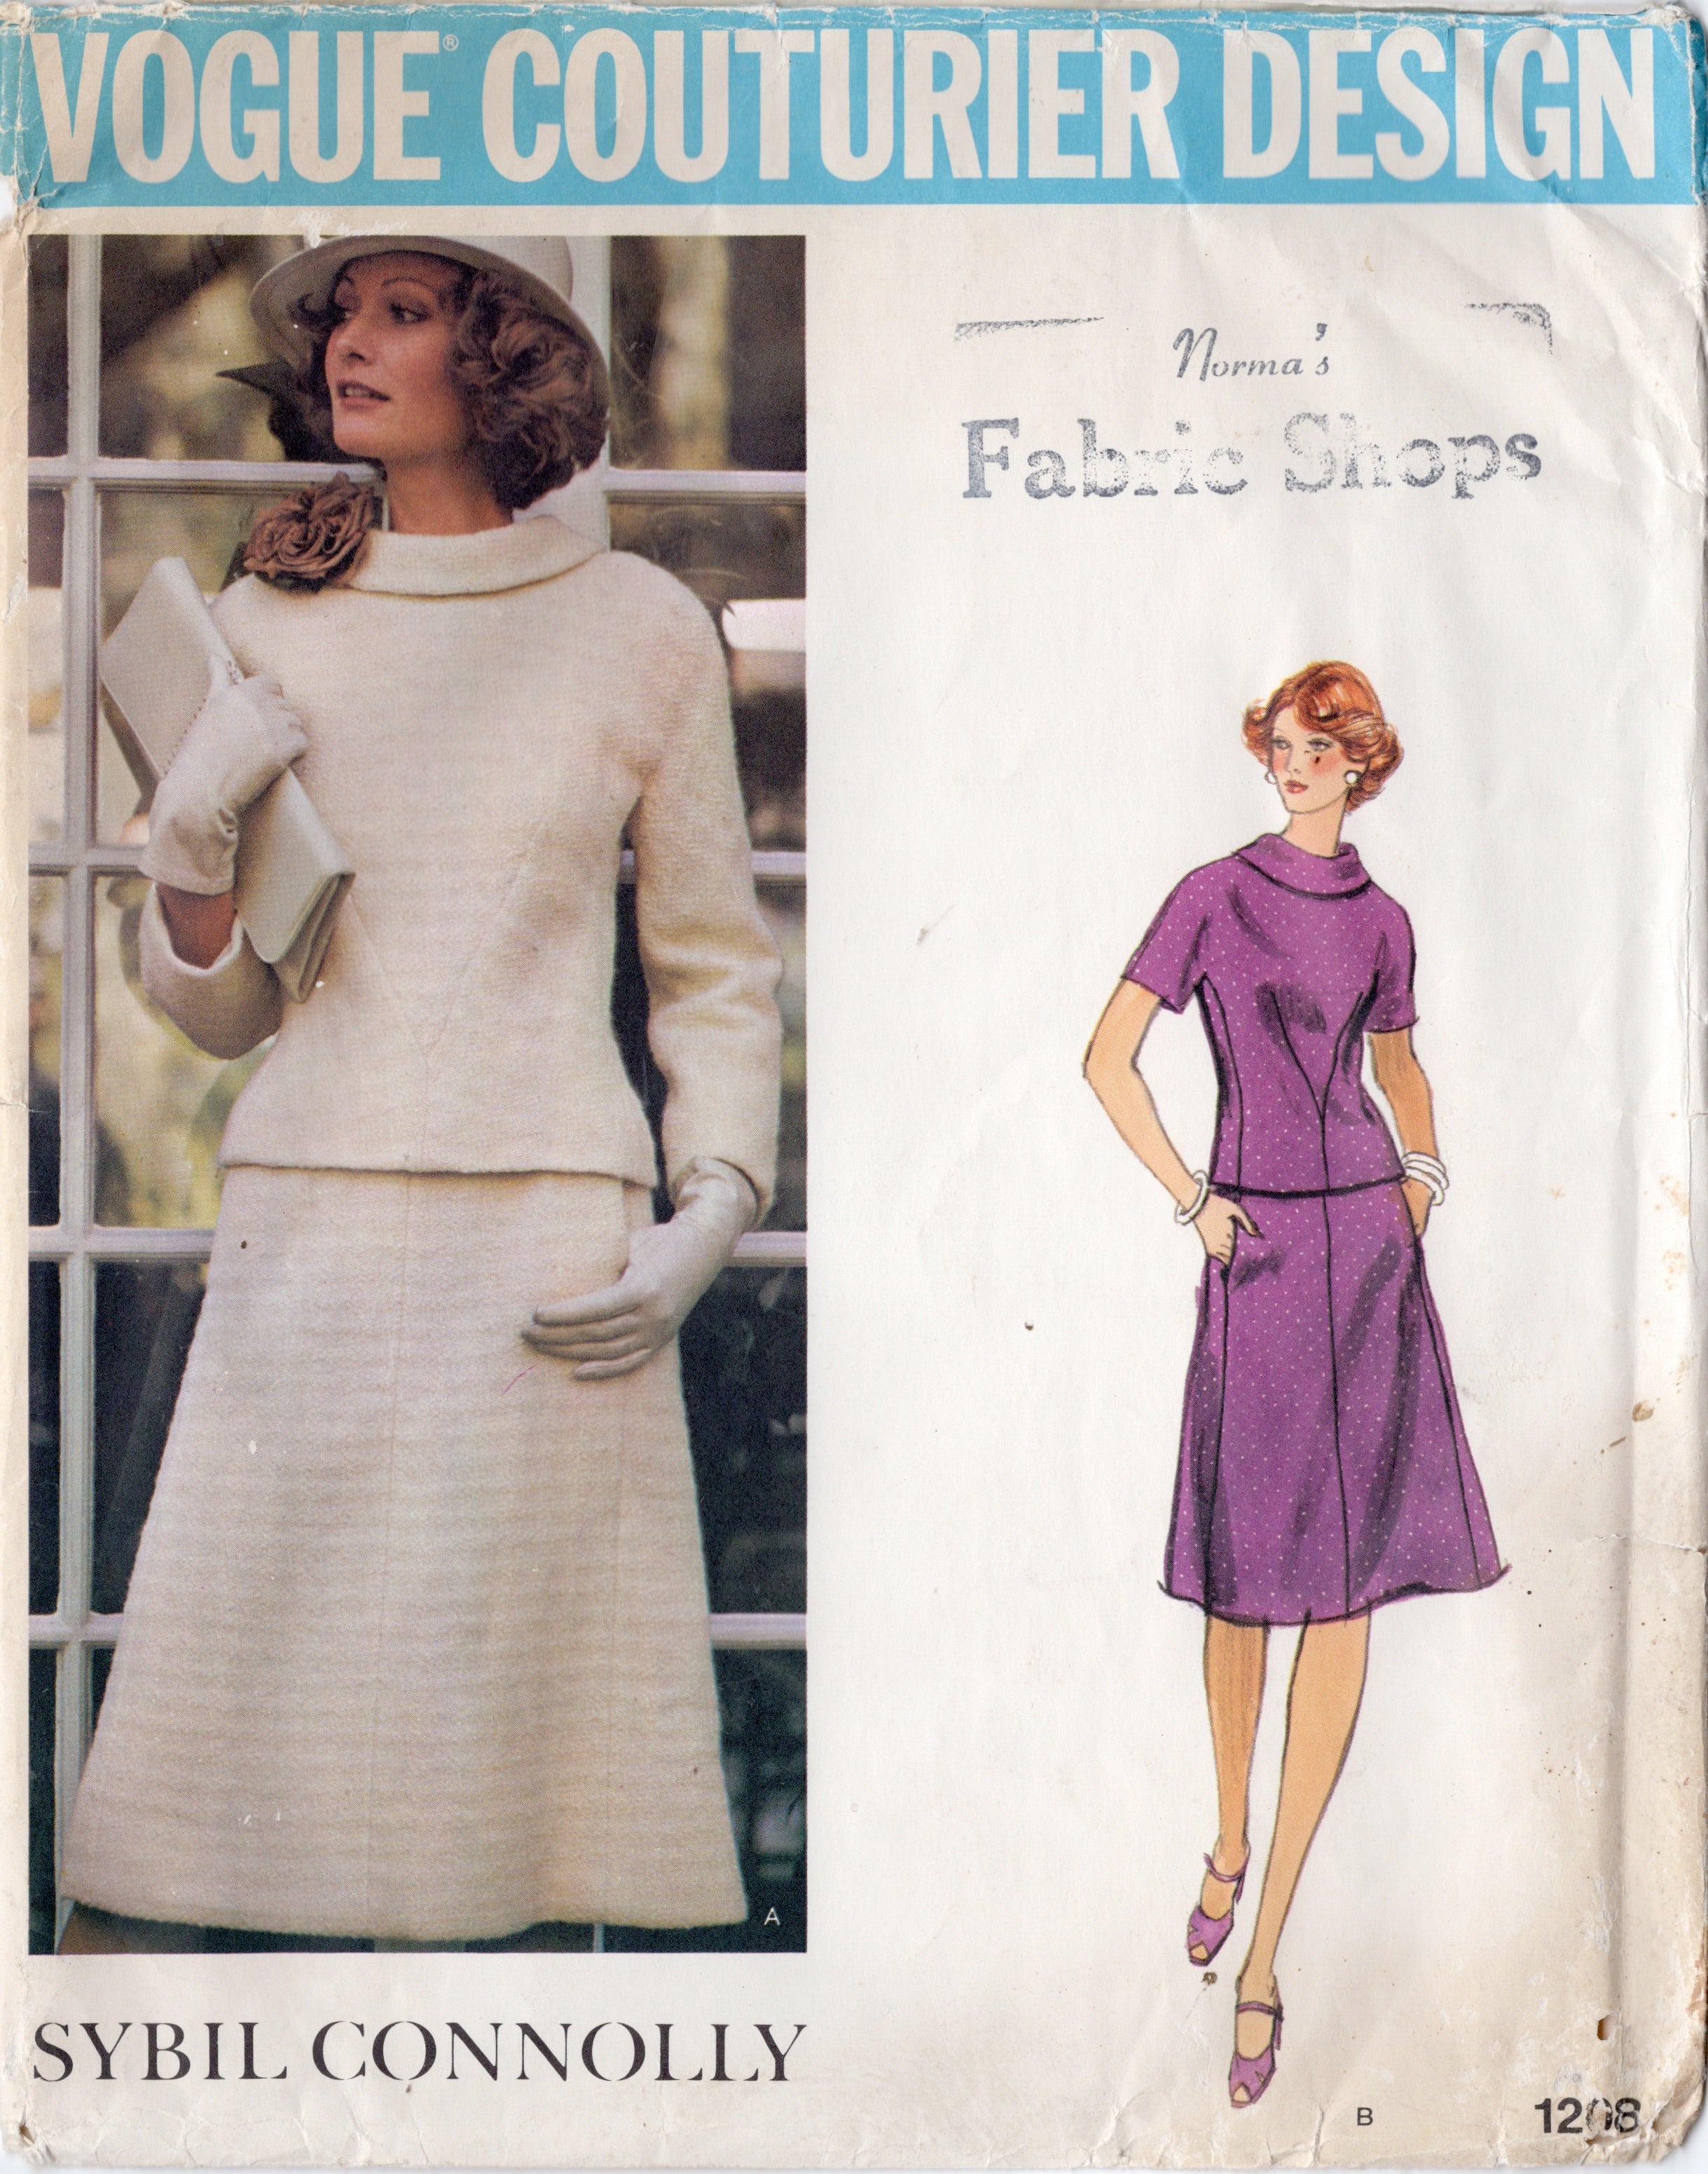 V Collar Couturier and Vogue with 1970\'s Top Backroom Design A-li Finds dart – and Bias